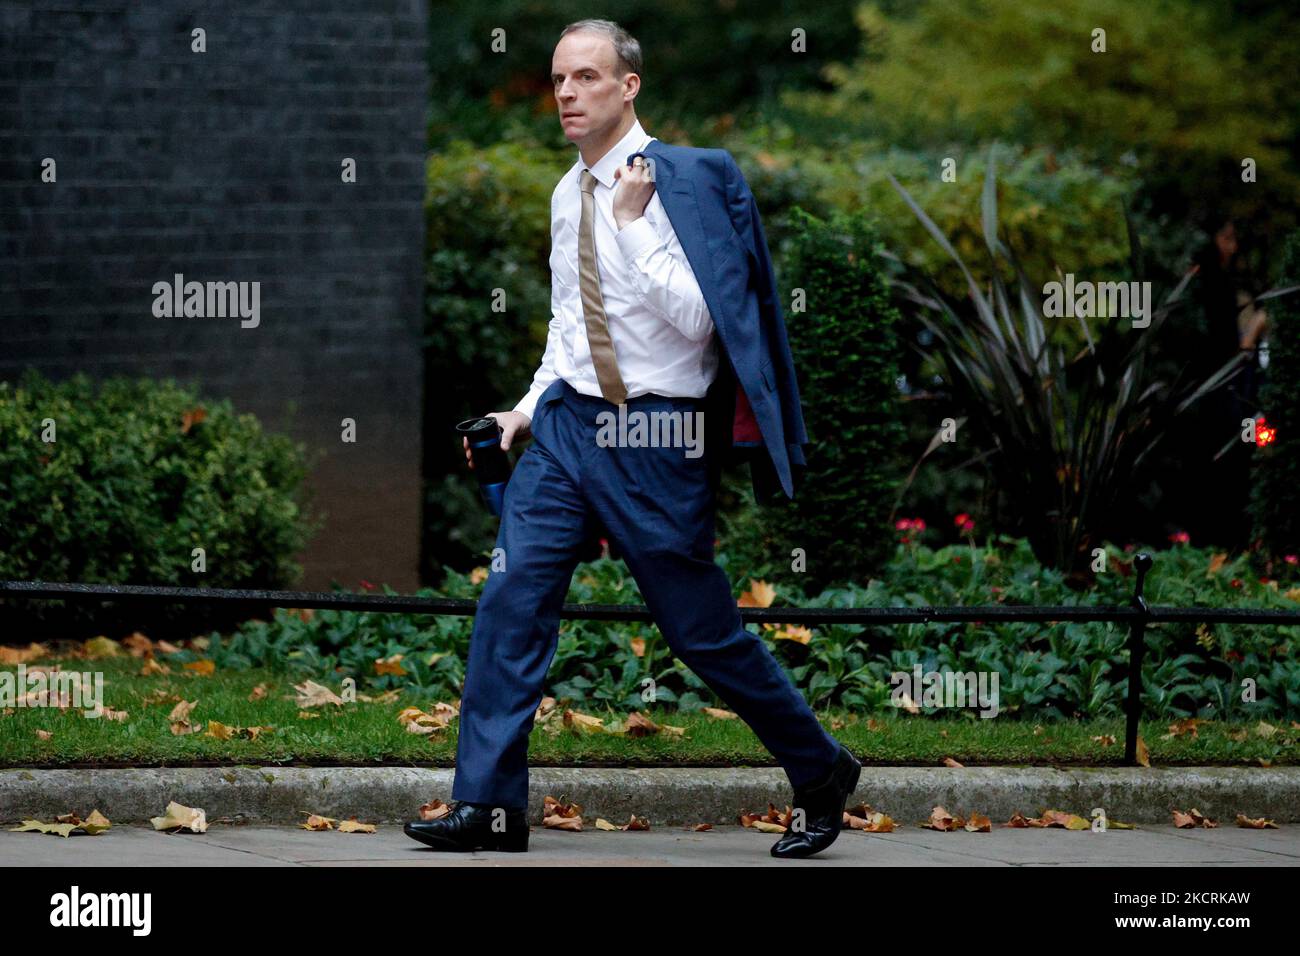 Deputy Prime Minister, Lord Chancellor, and Secretary of State for Justice Dominic Raab, Conservative Party MP for Esher and Walton, arrives for a cabinet meeting at 10 Downing Street in London, England, on October 27, 2021. British Chancellor of the Exchequer Rishi Sunak today presents his Budget for the year ahead to MPs in the House of Commons. (Photo by David Cliff/NurPhoto) Stock Photo